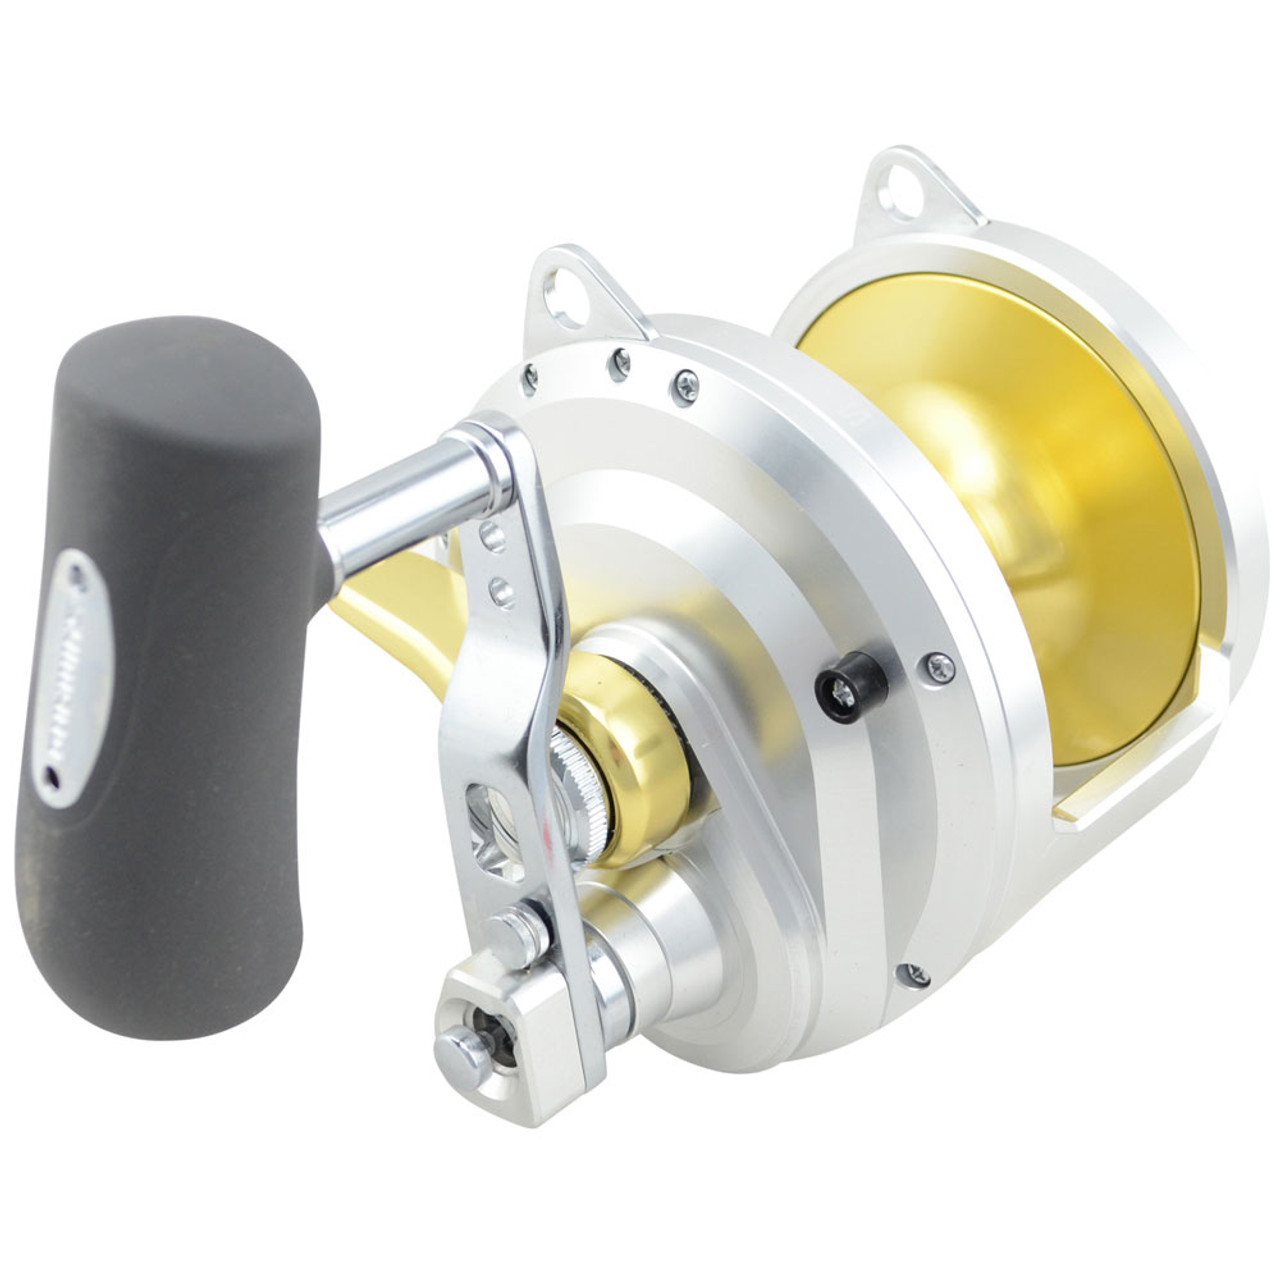 Find Opening Sales Shimano Talica Fishing Reel TAC50 2 Speed get free  shipping on orders over $50